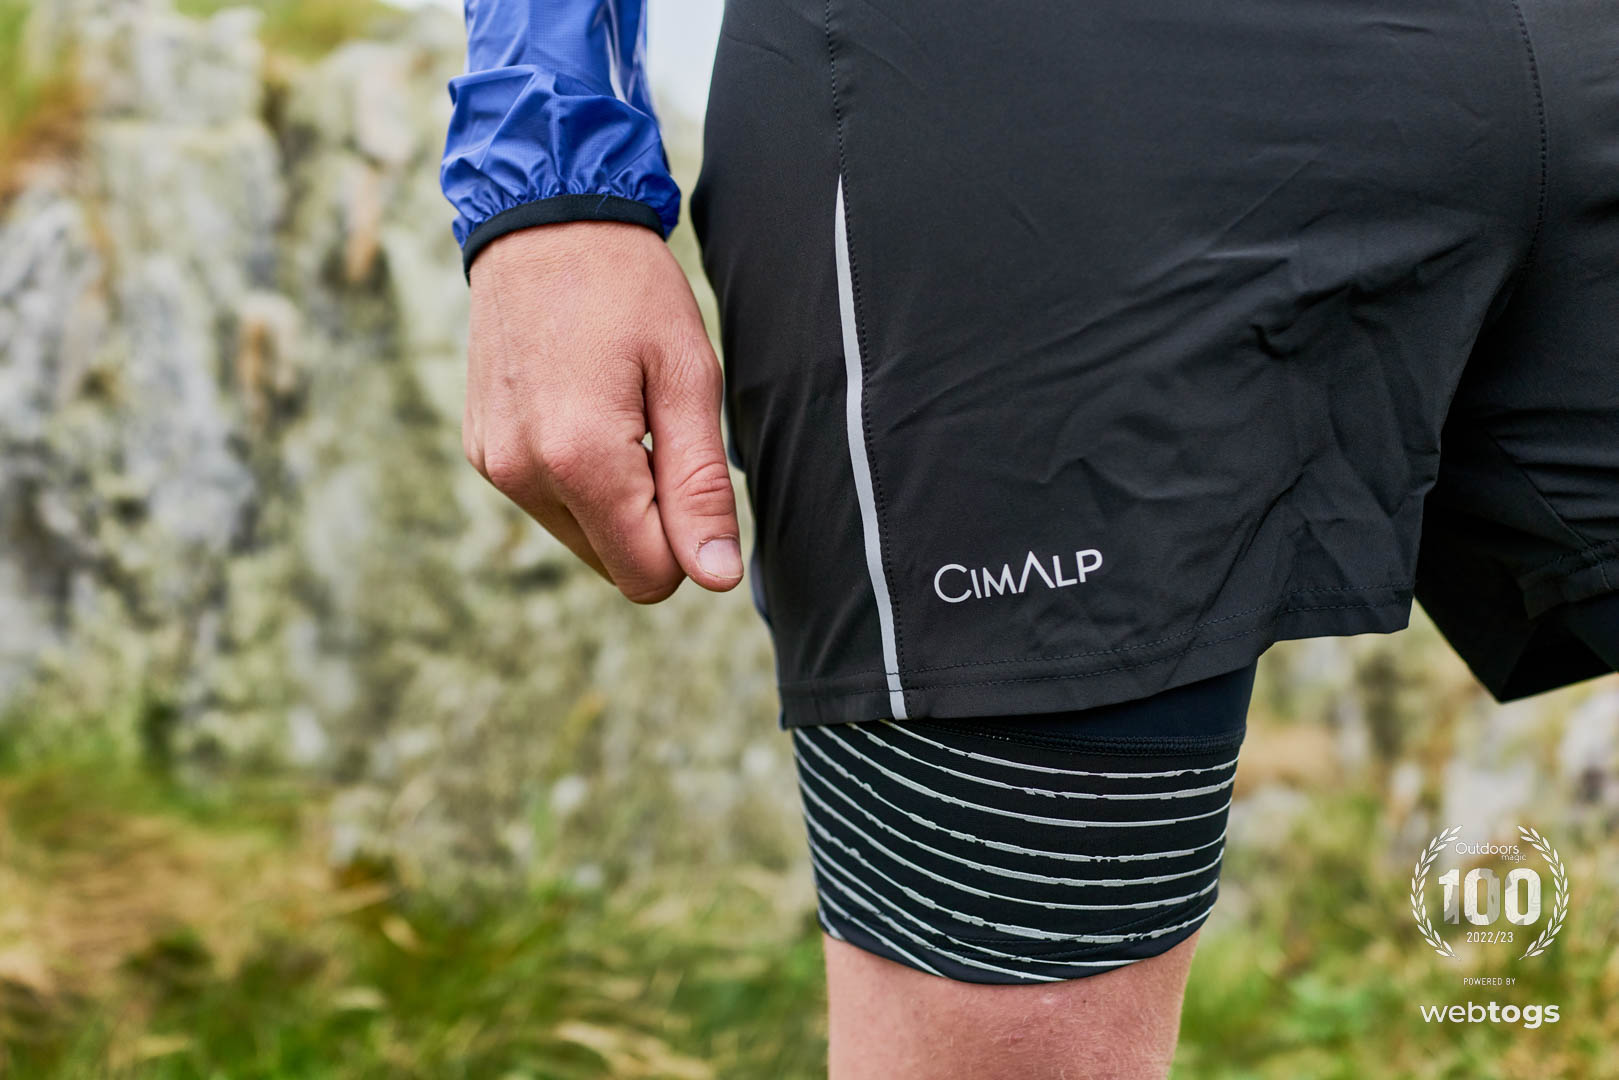 CimAlp Twin Trail Running Shorts | Review